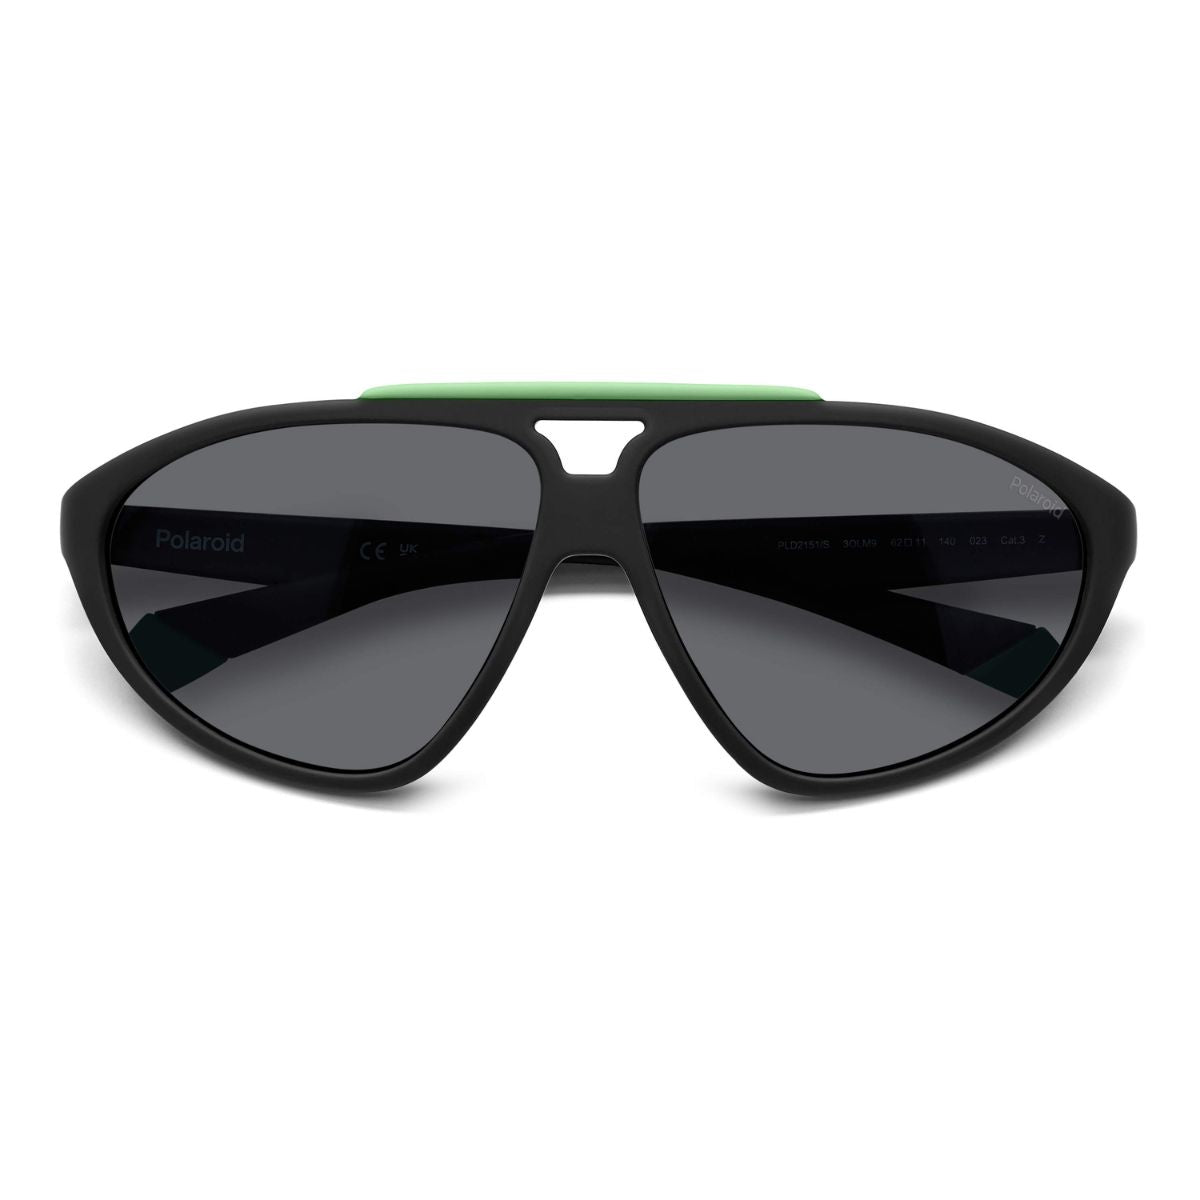 "Stylish Polarized Sunglasses For Polaroid Collections At Optorium"